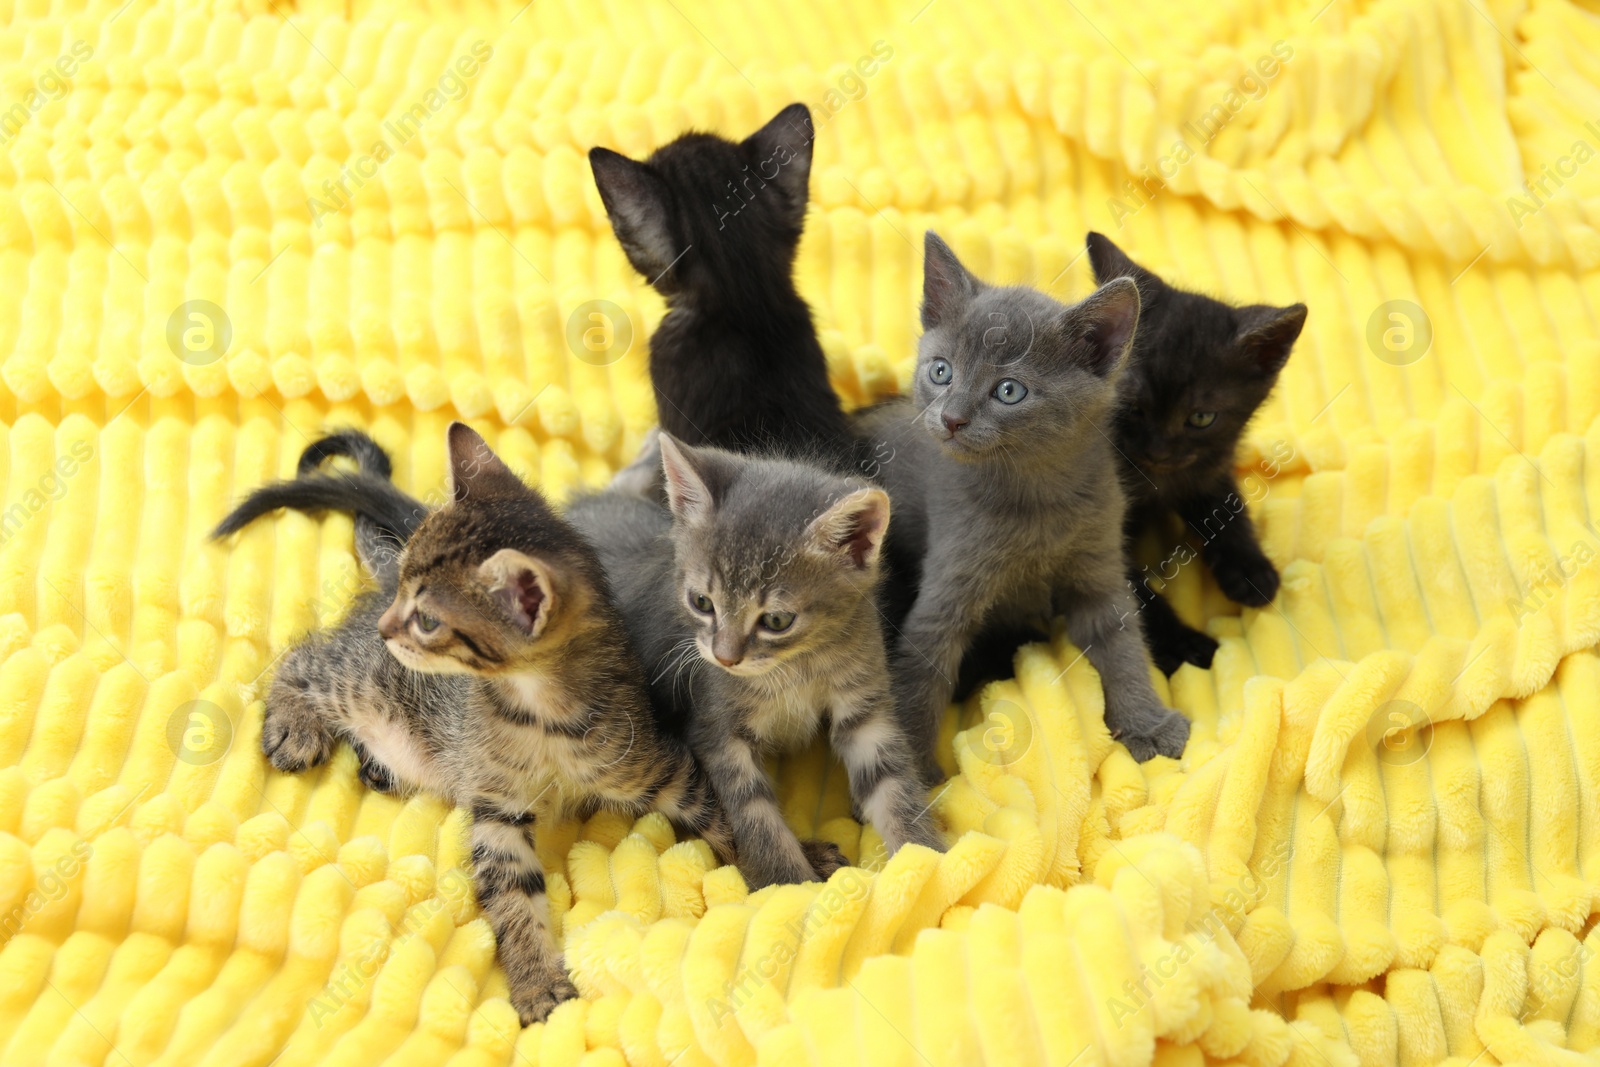 Photo of Cute fluffy kittens on blanket indoors. Baby animals